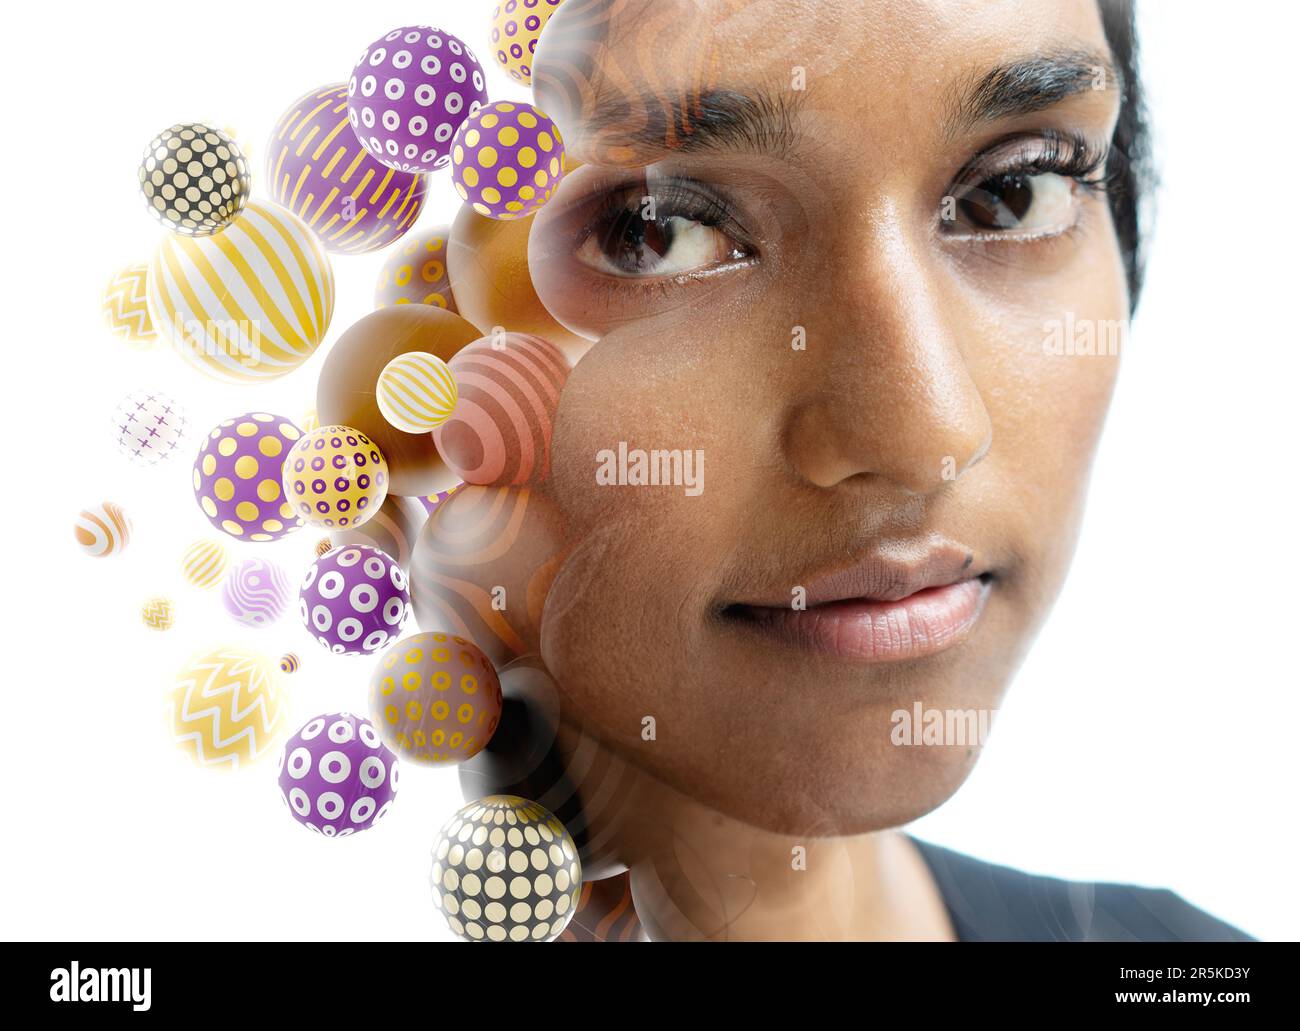 Double exposure portrait of a young woman combined with 3D spheres Stock Photo